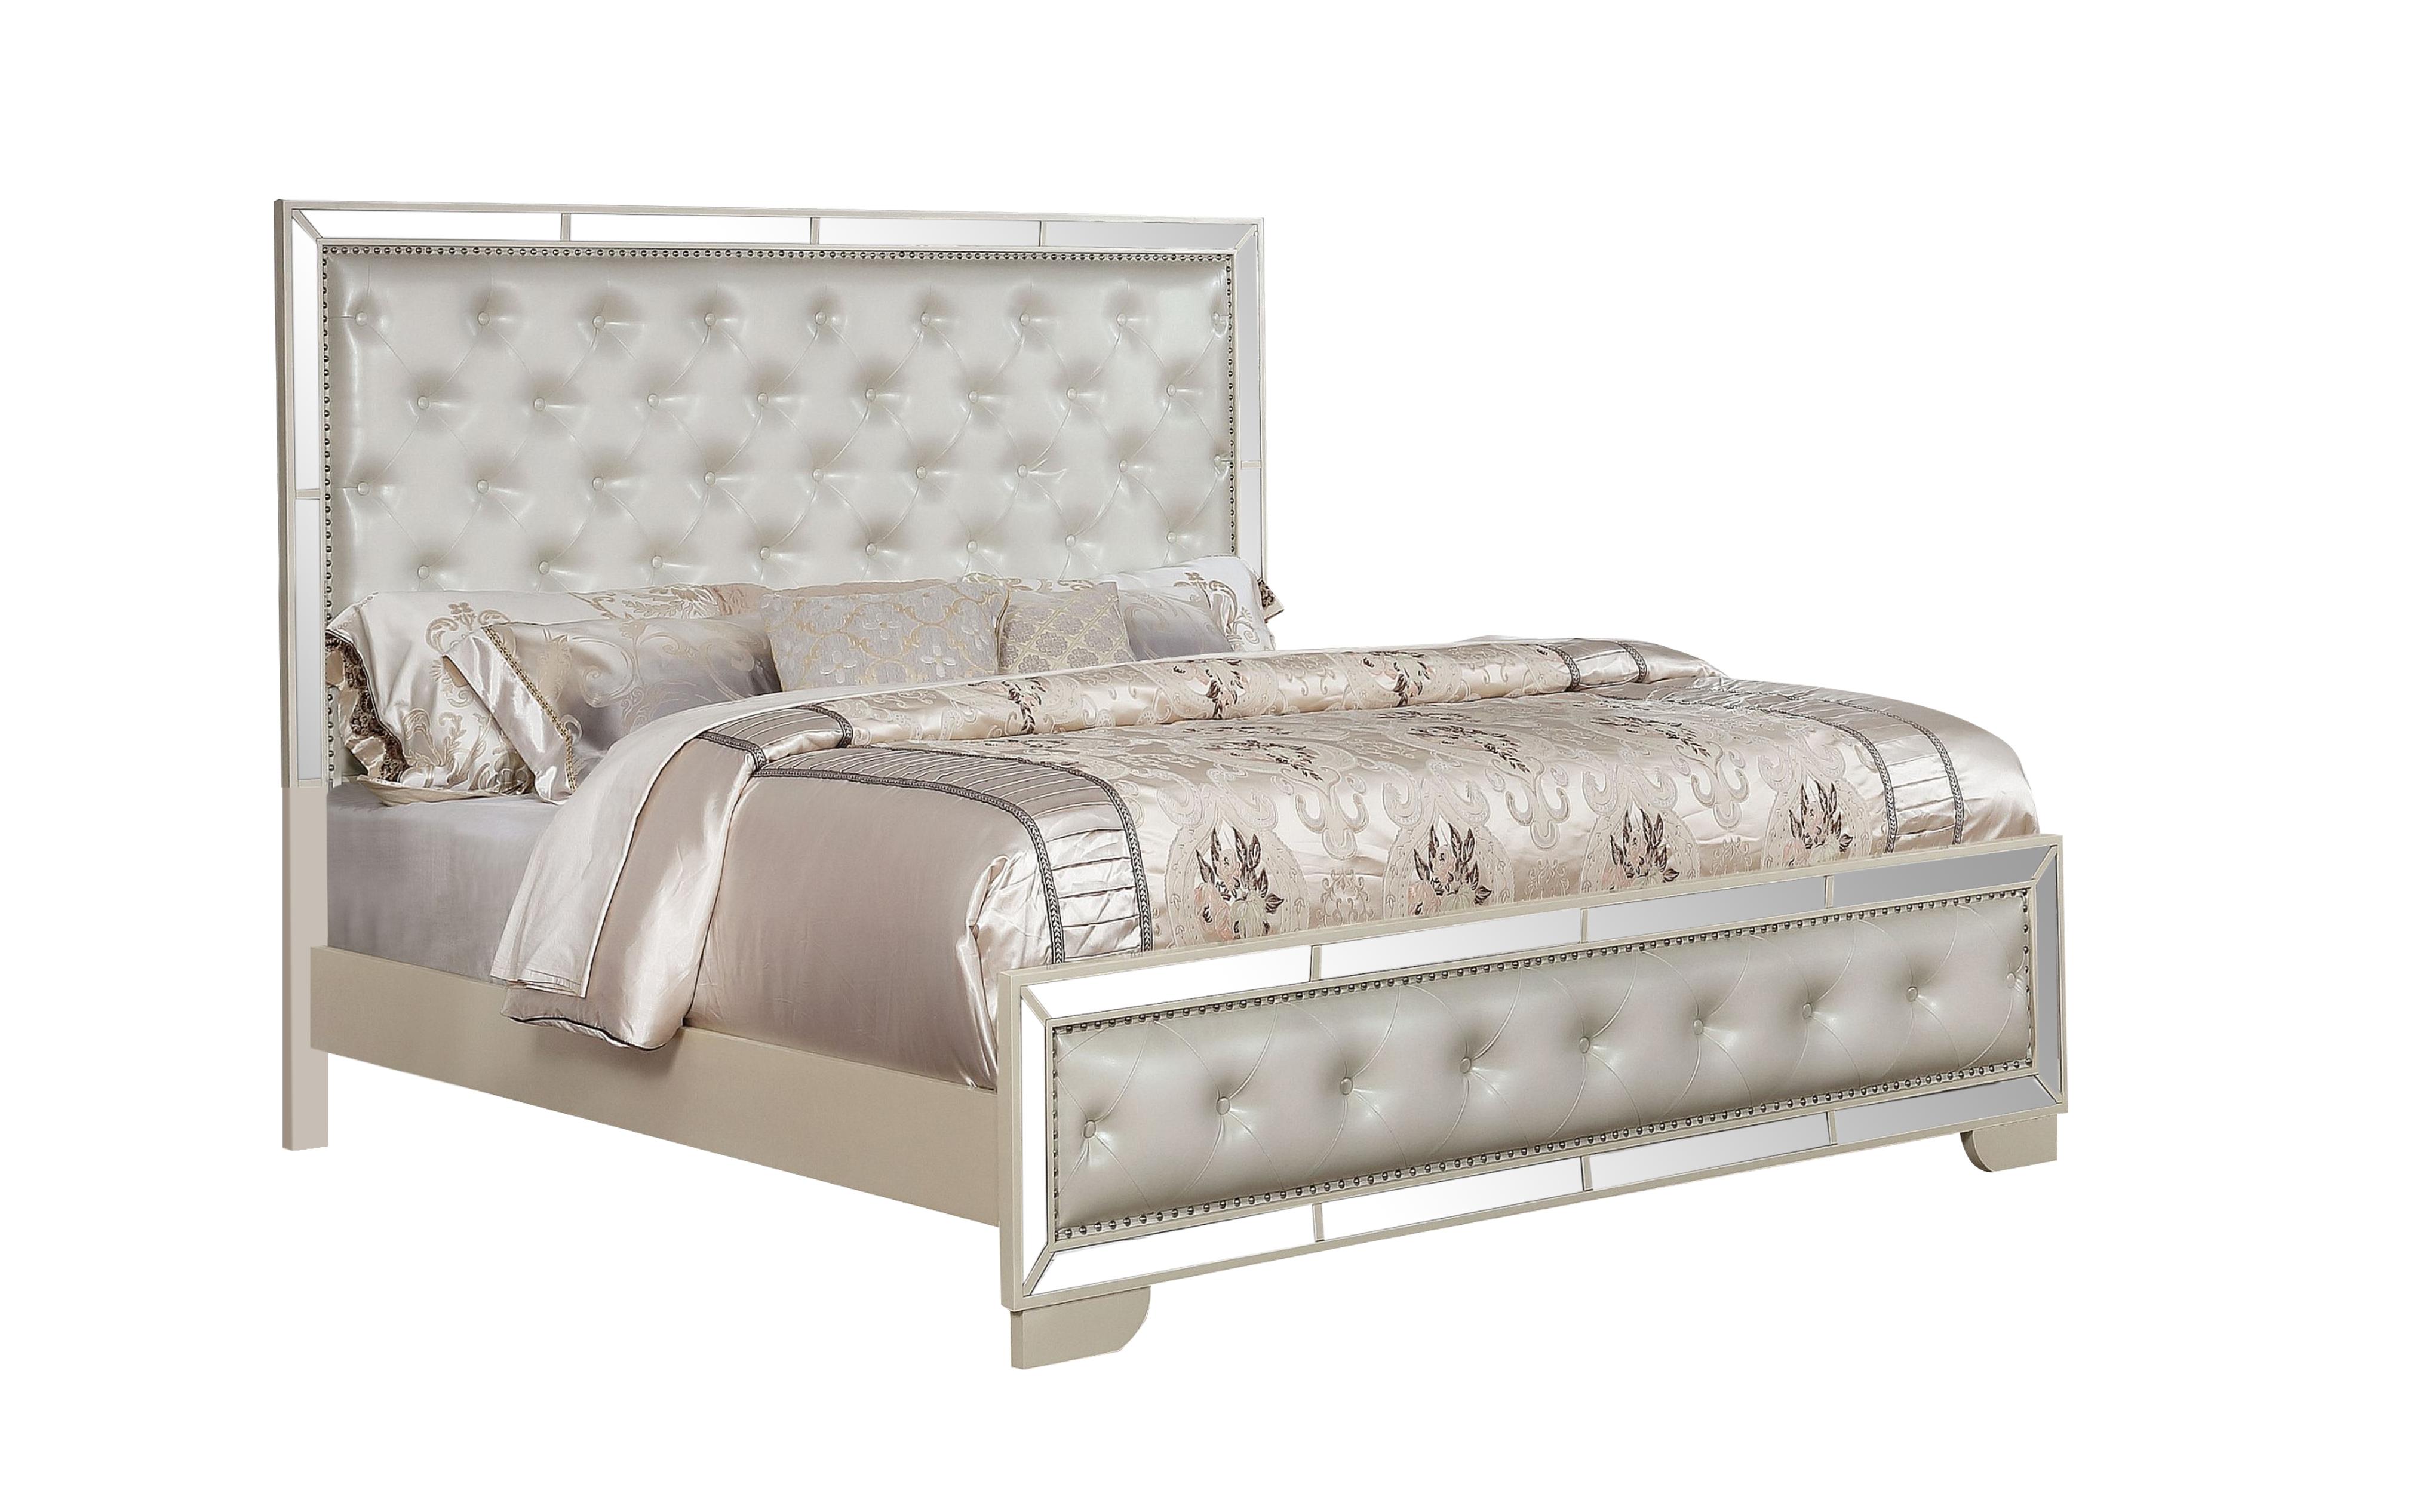 

    
Glam Beige Mirrored Inlay Tufted King Bedroom Set 4P MADISON Galaxy Home Modern
